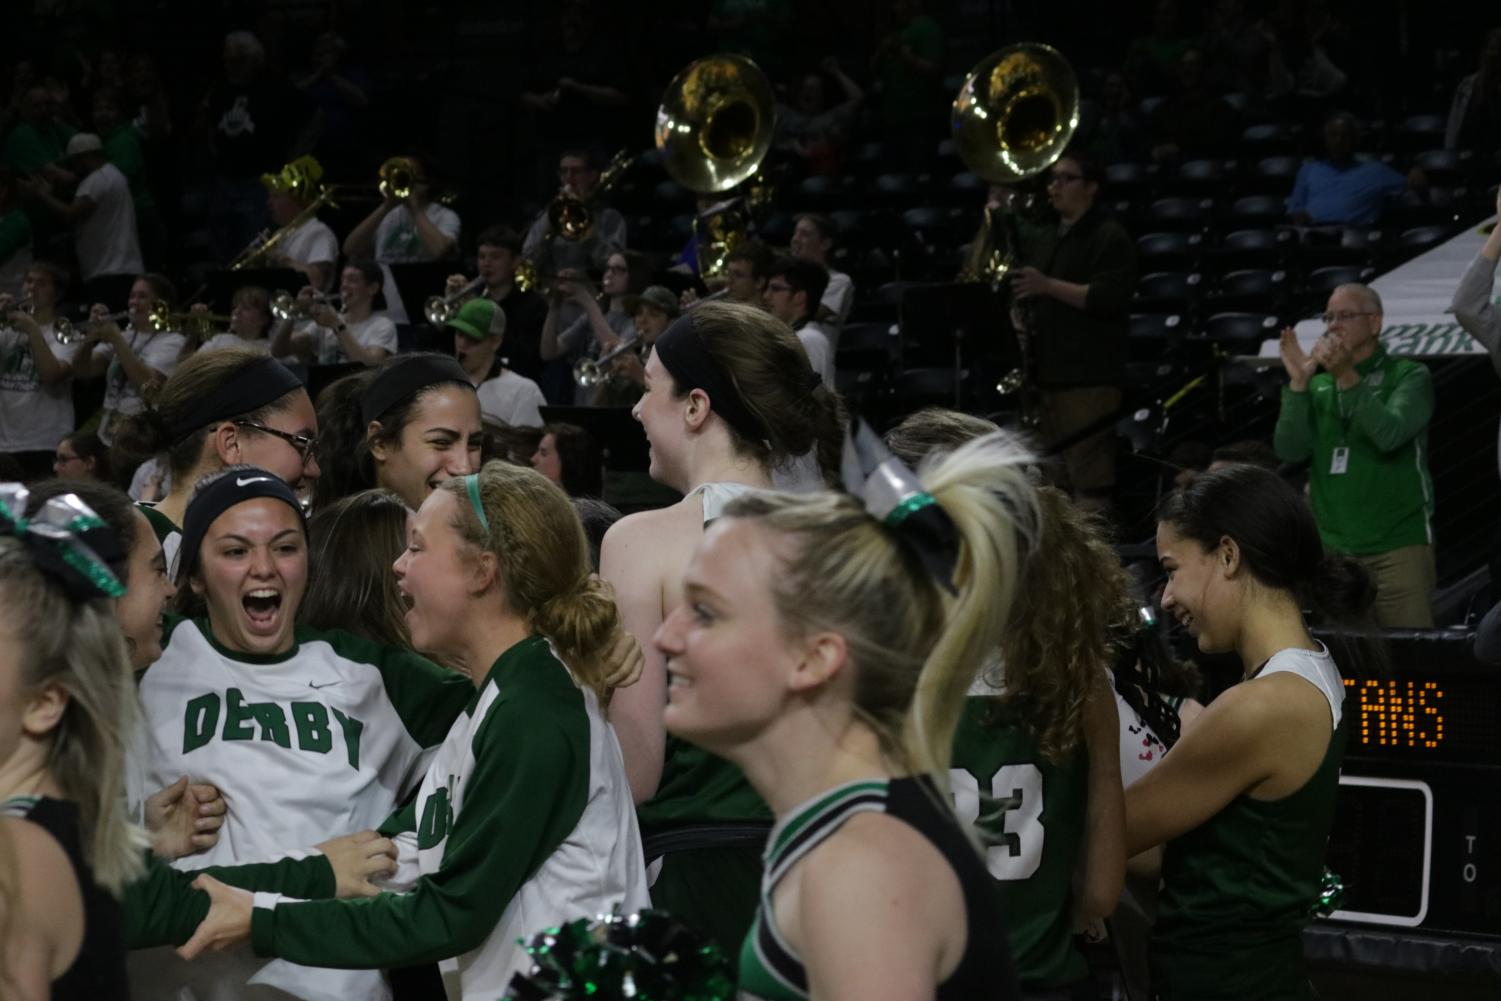 End+of+the+Derby+girls+basketball+game+against+Wichita+South%2C+state+semifinals+%28Photos+by+Brett+Jones%29